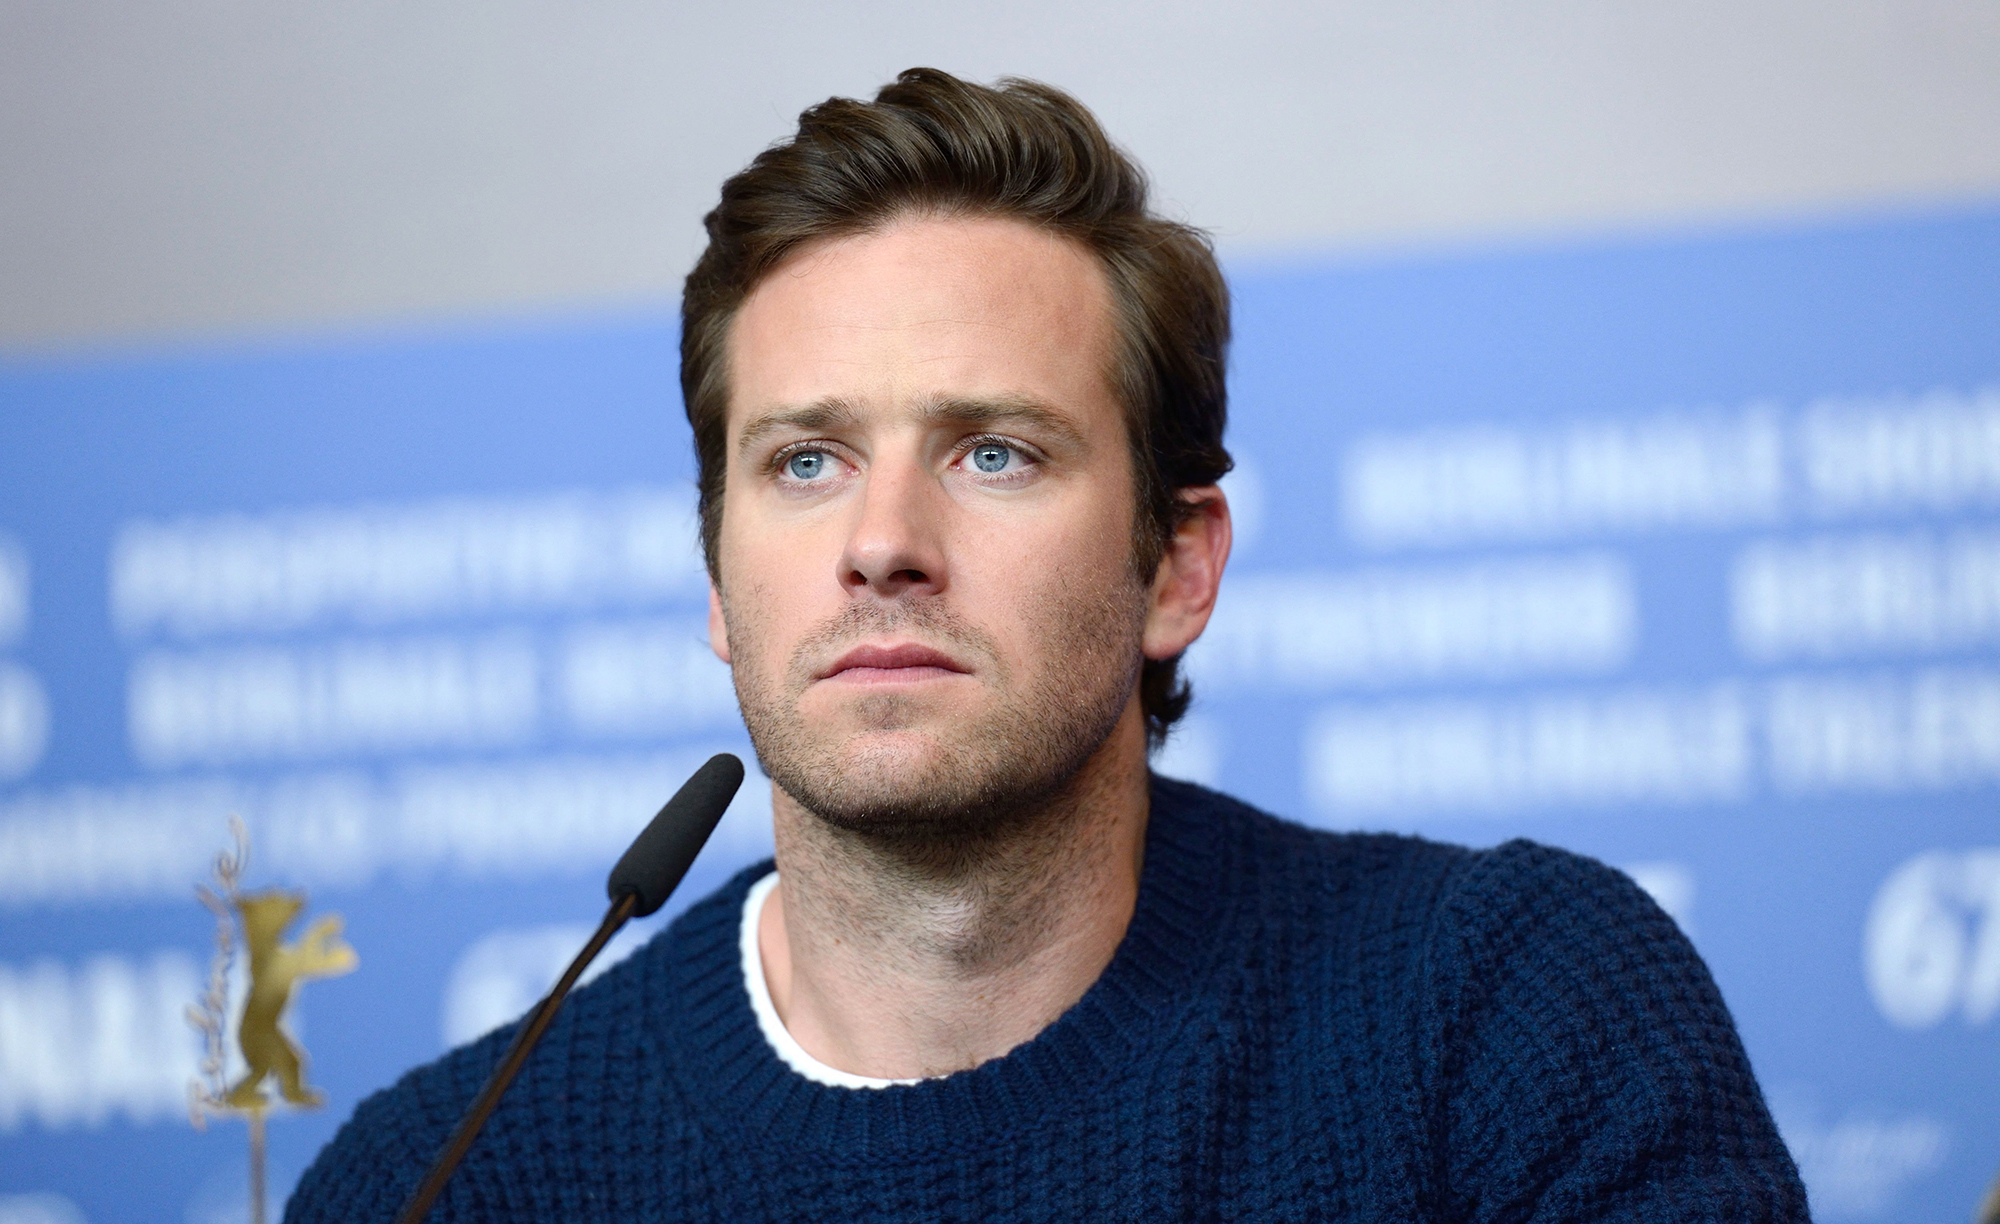 Armie Hammer Breaks Silence on Assault Claims, NSFW Fantasies pic